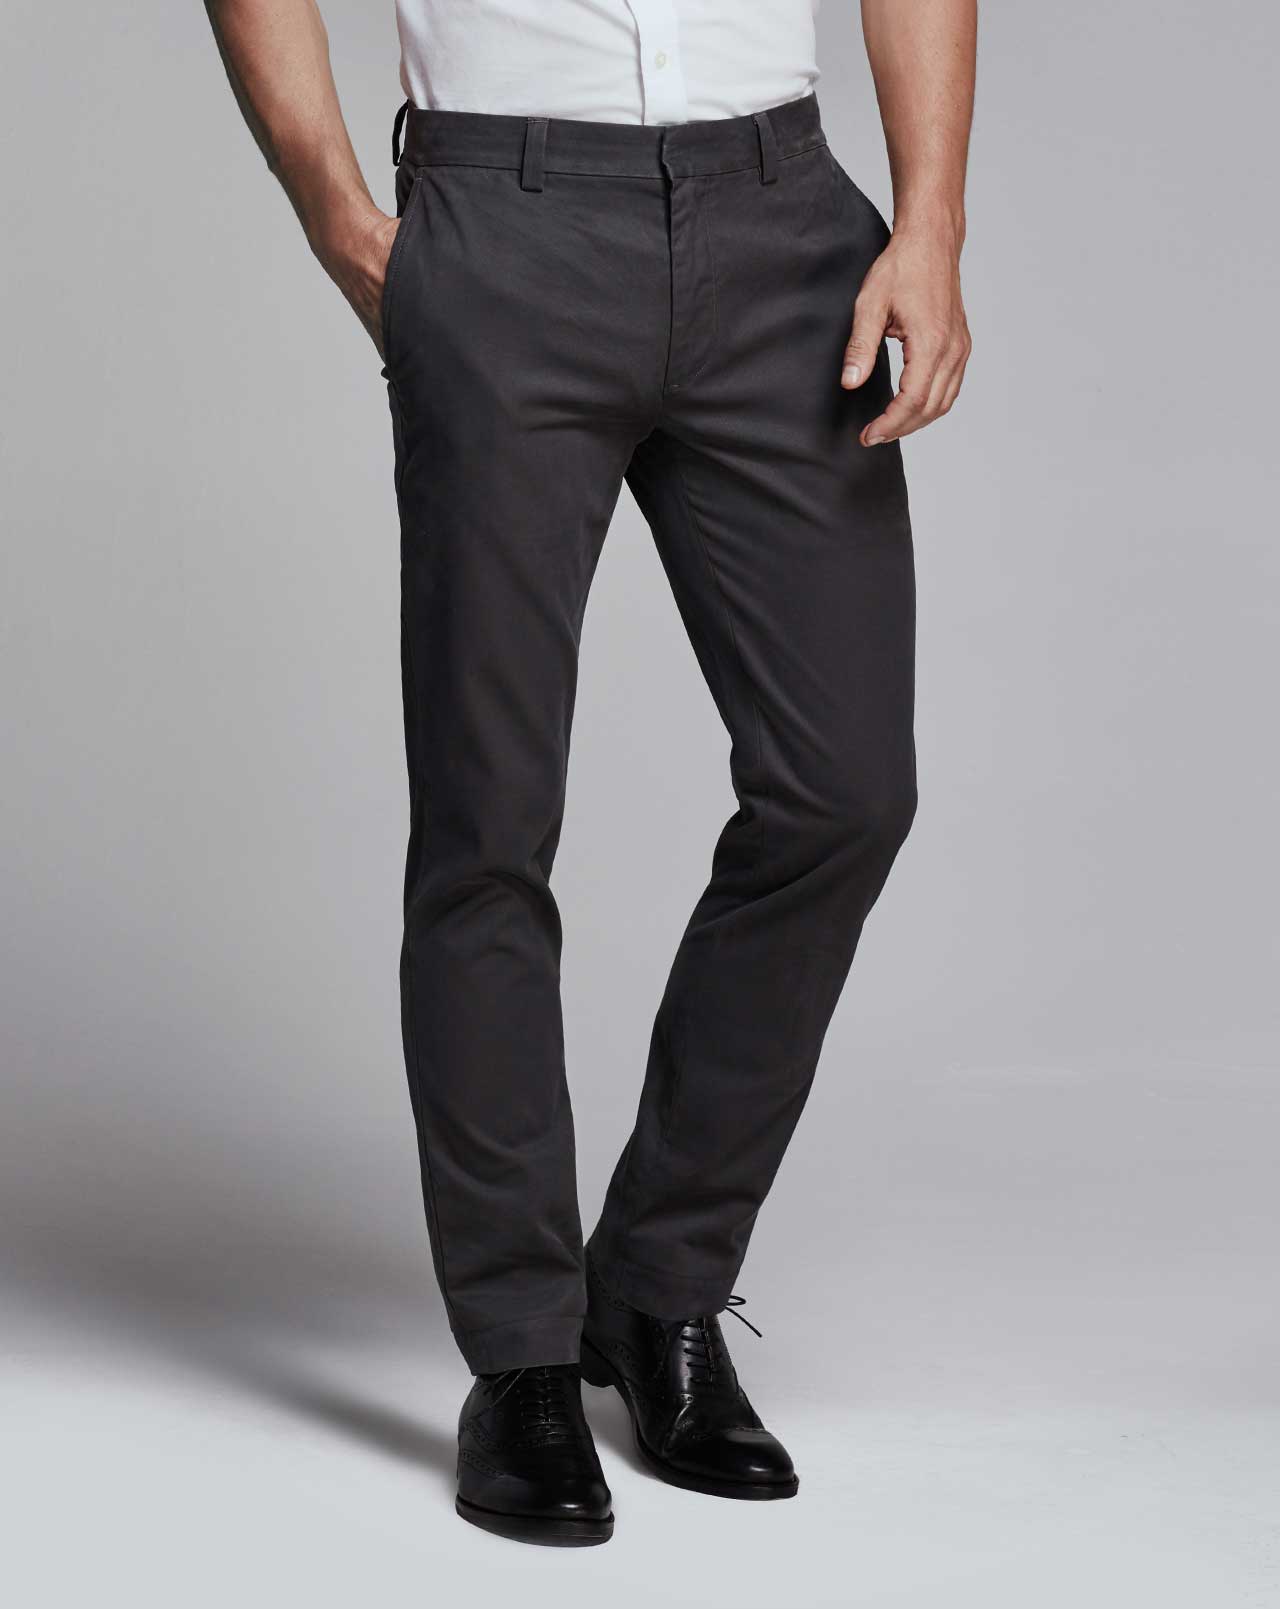 Fit Guide Men's Chinos - Fulton